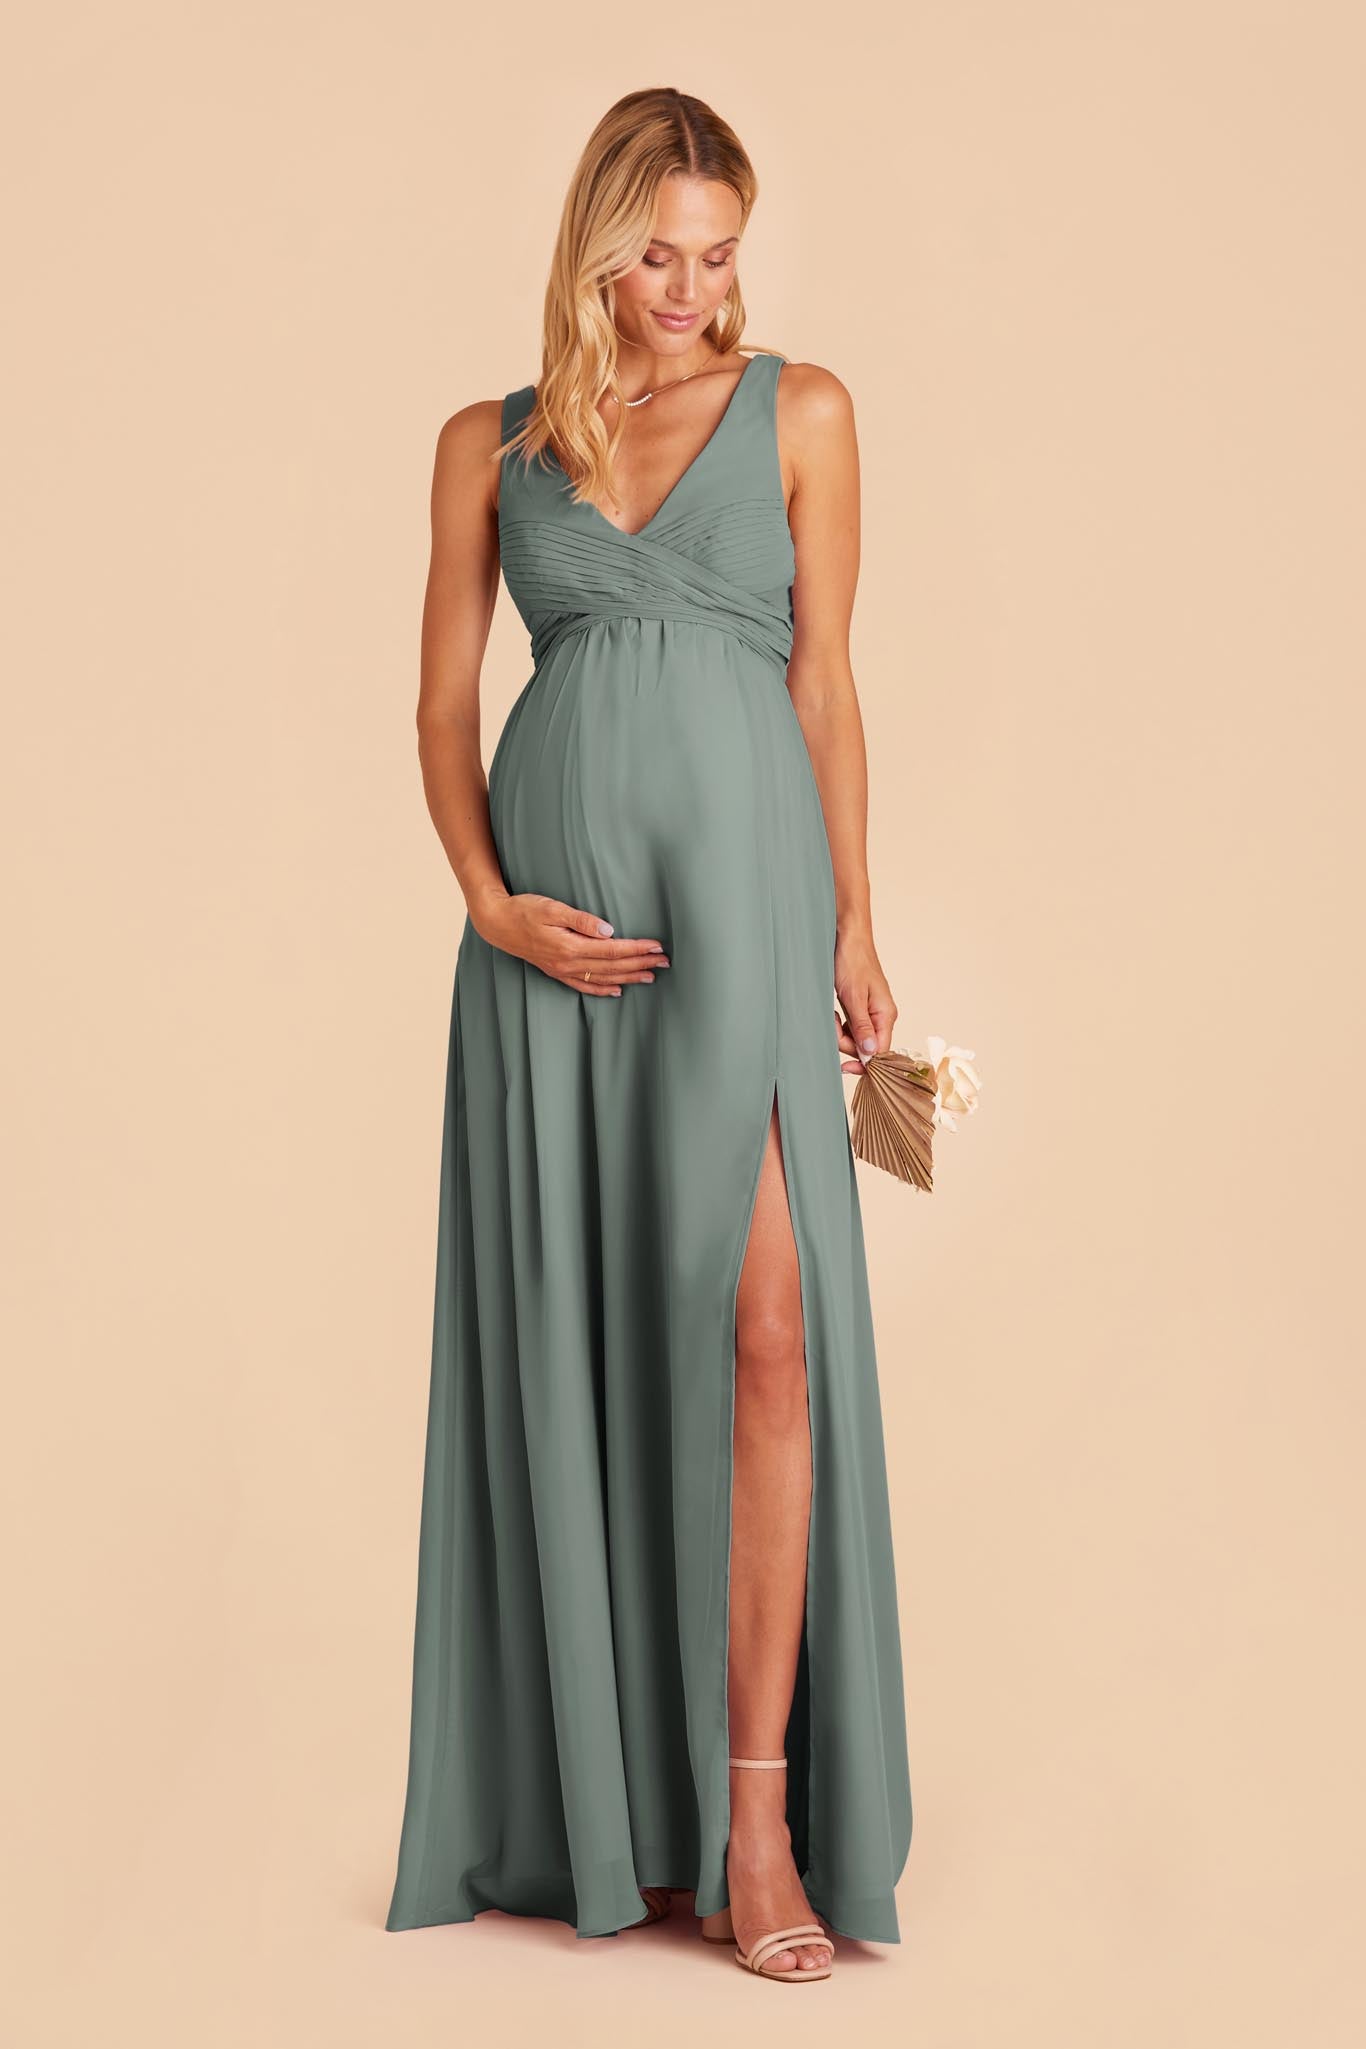 Sea Glass Laurie Empire Dress by Birdy Grey